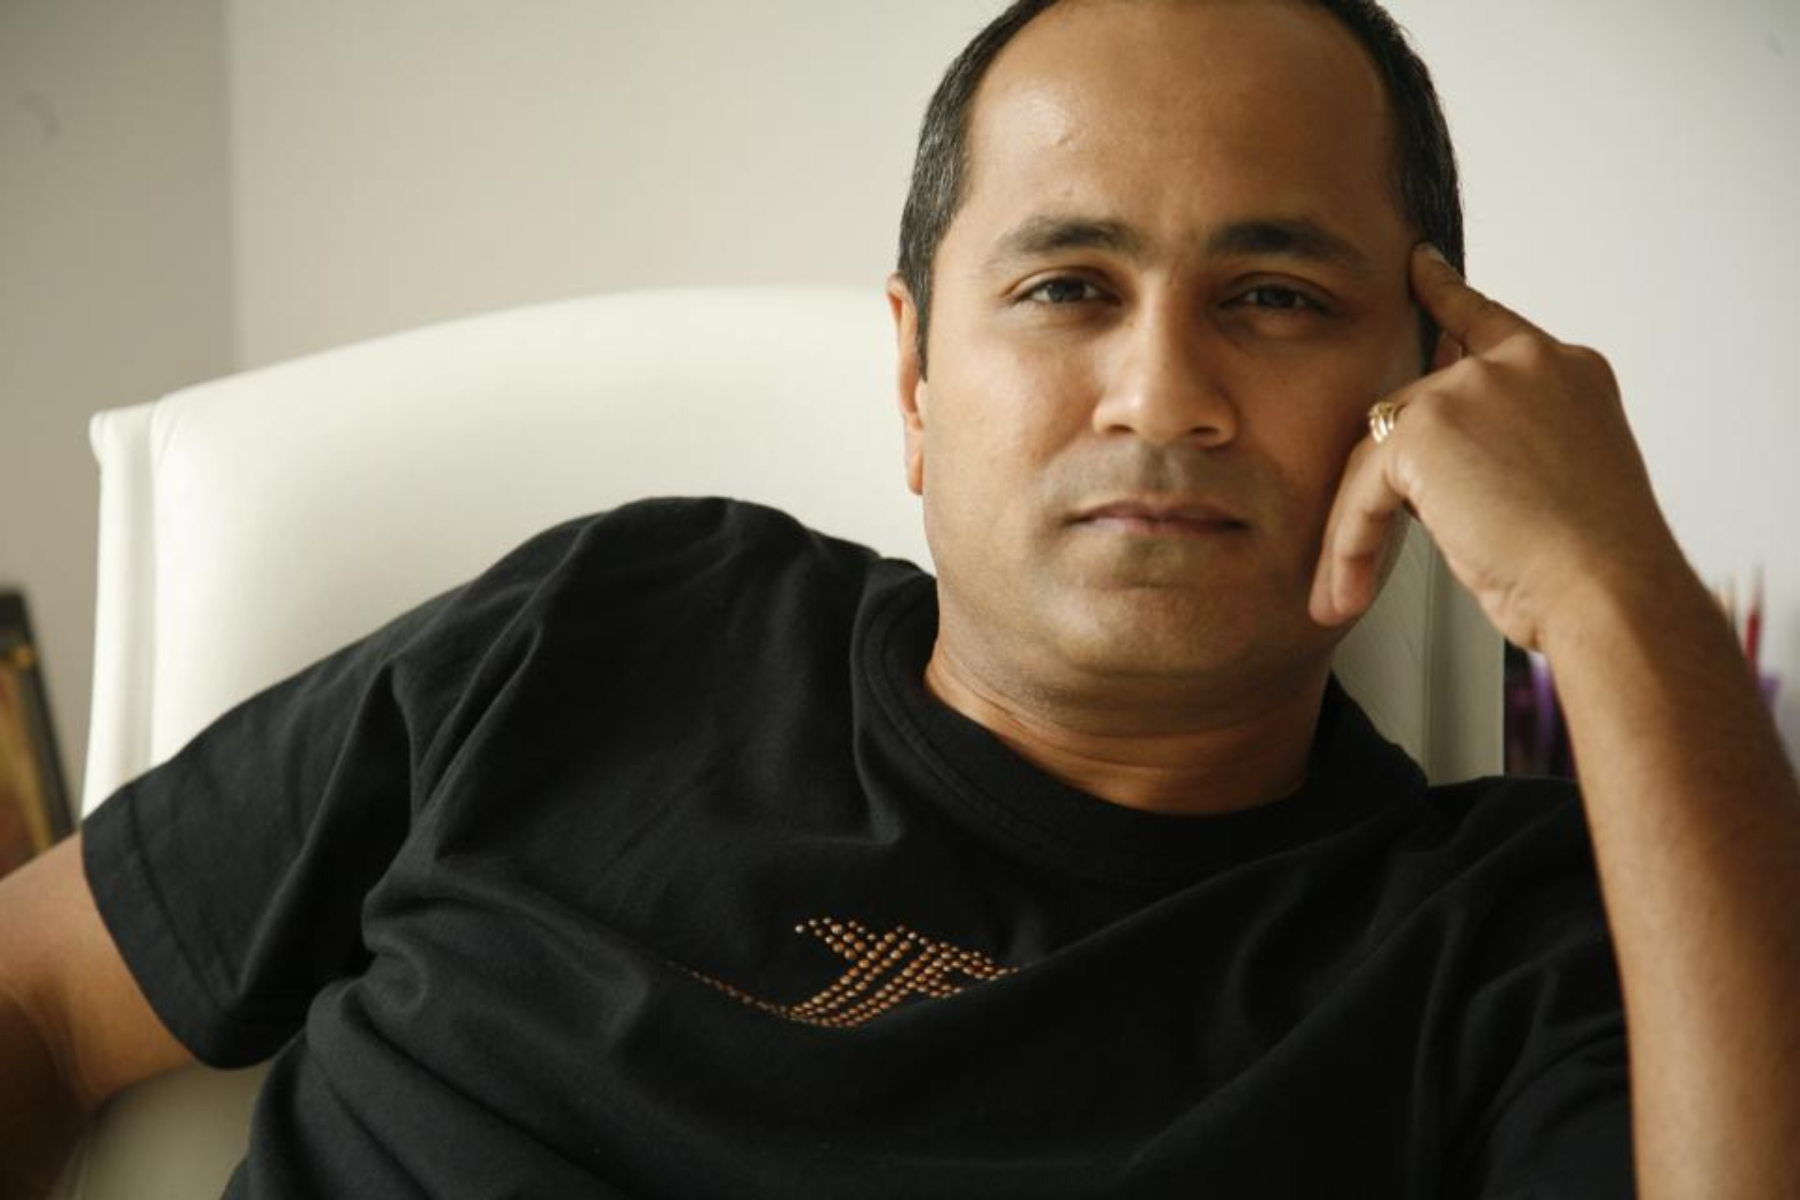 Vipul Shah is pointing to his head with his finger